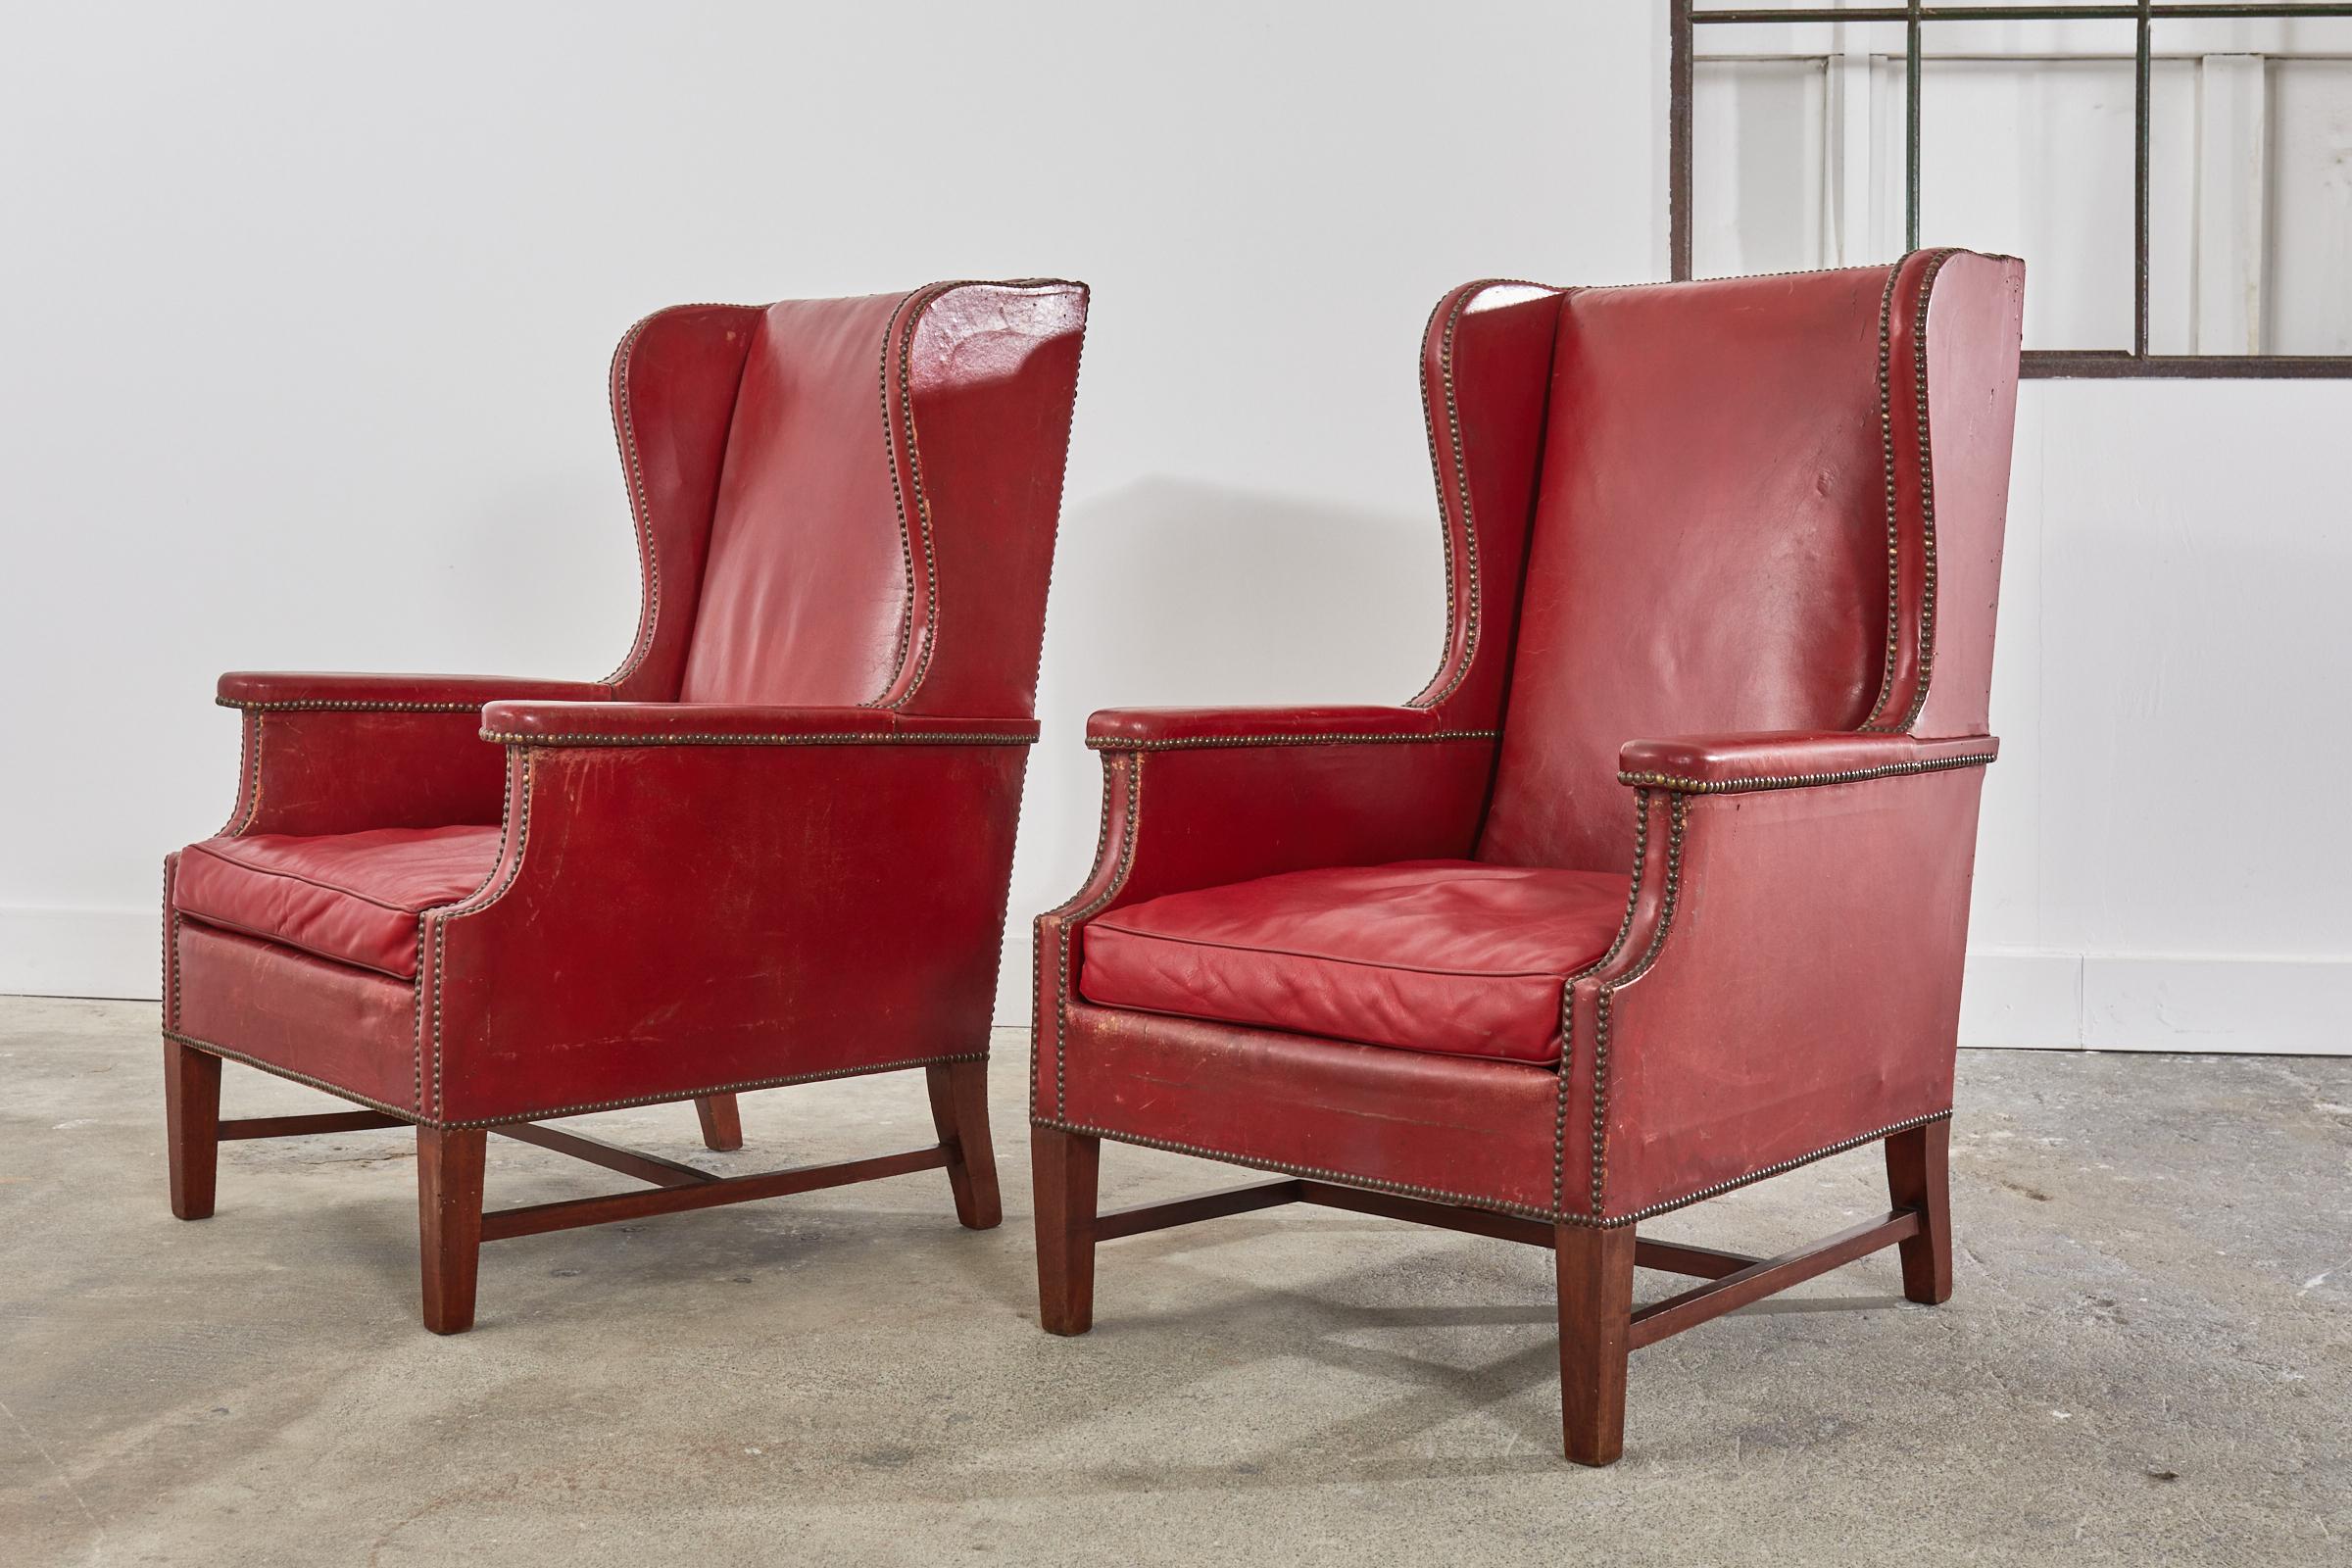 Hand-Crafted Pair of French Art Deco Cherry Red Leather Wingback Chairs For Sale